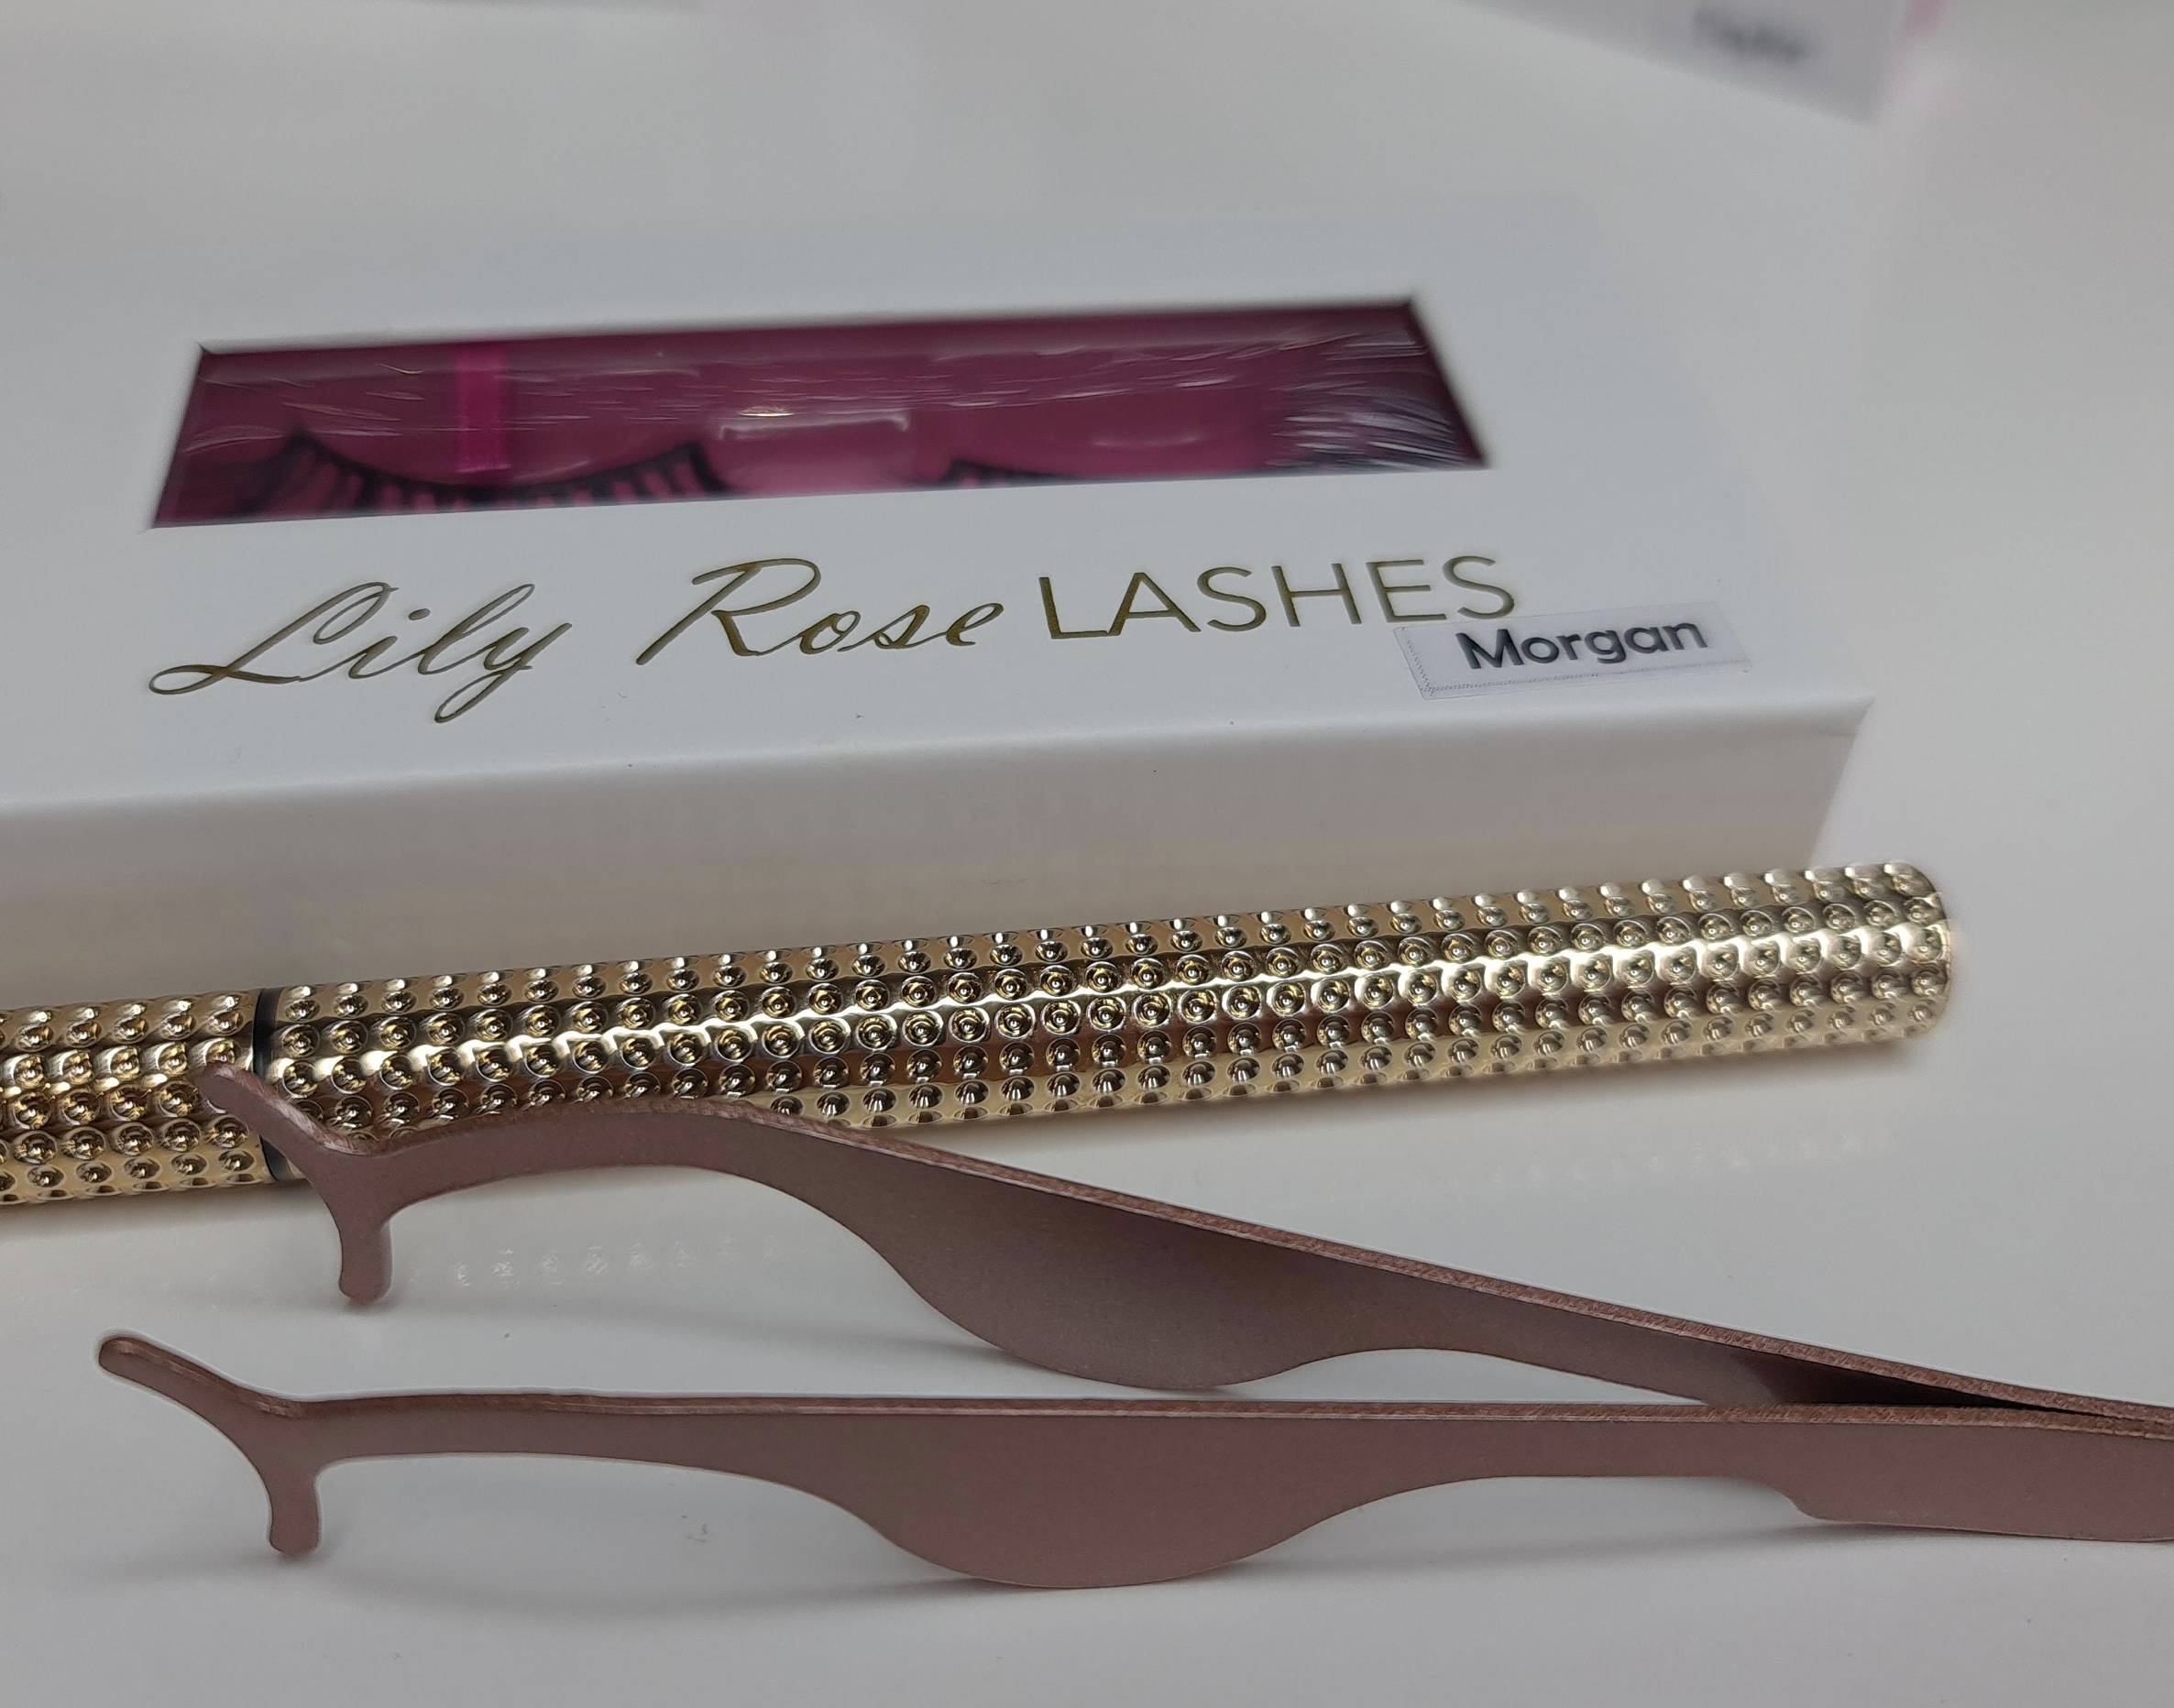 Accessories to compliment your lash range